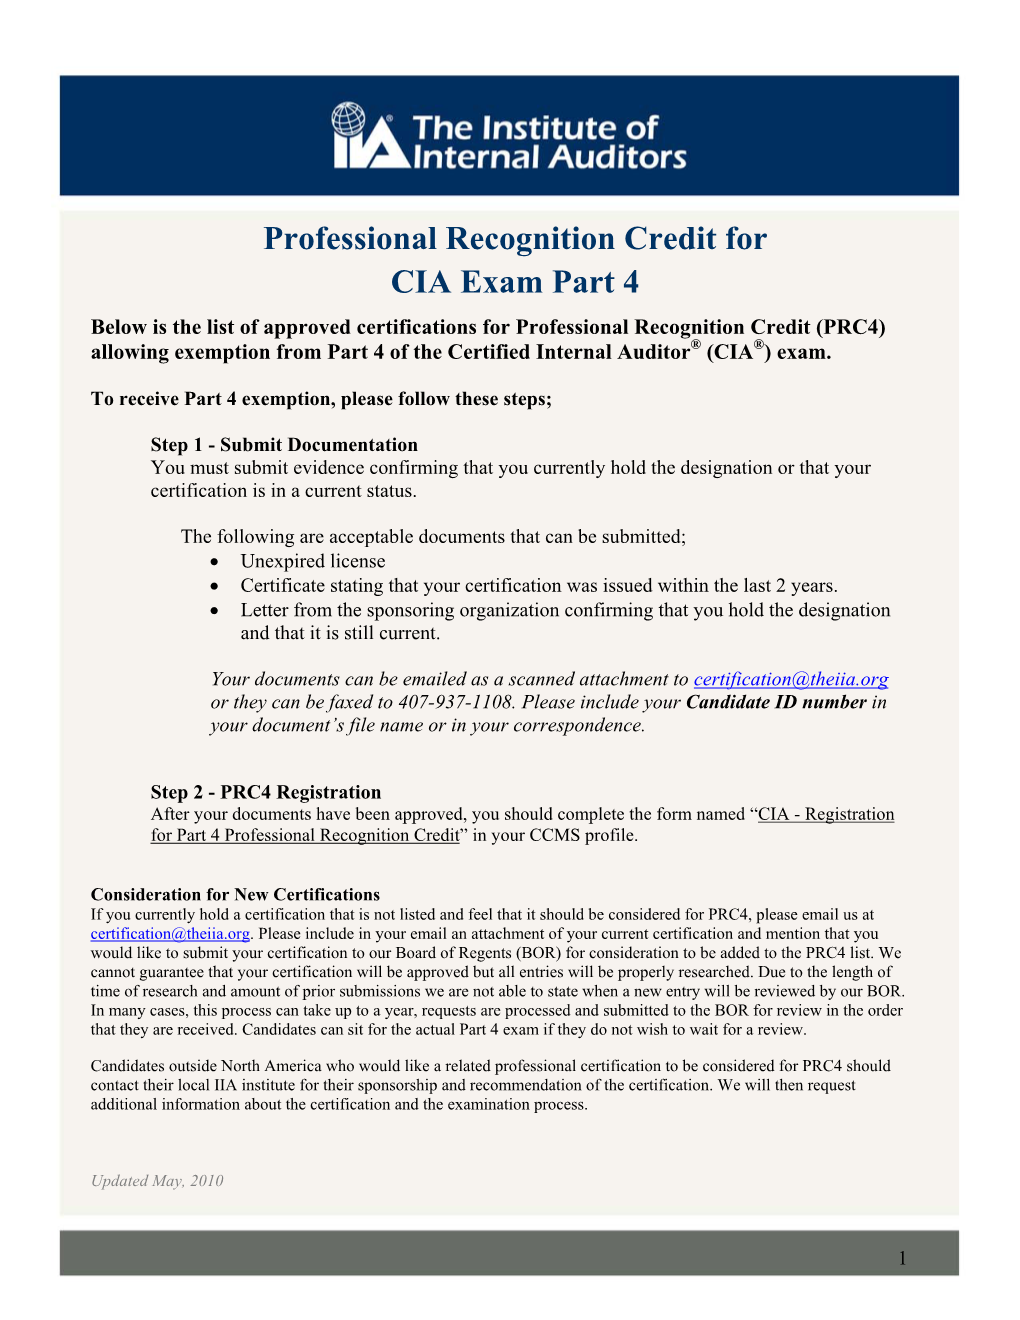 Professional Recognition Credit for CIA Exam Part 4